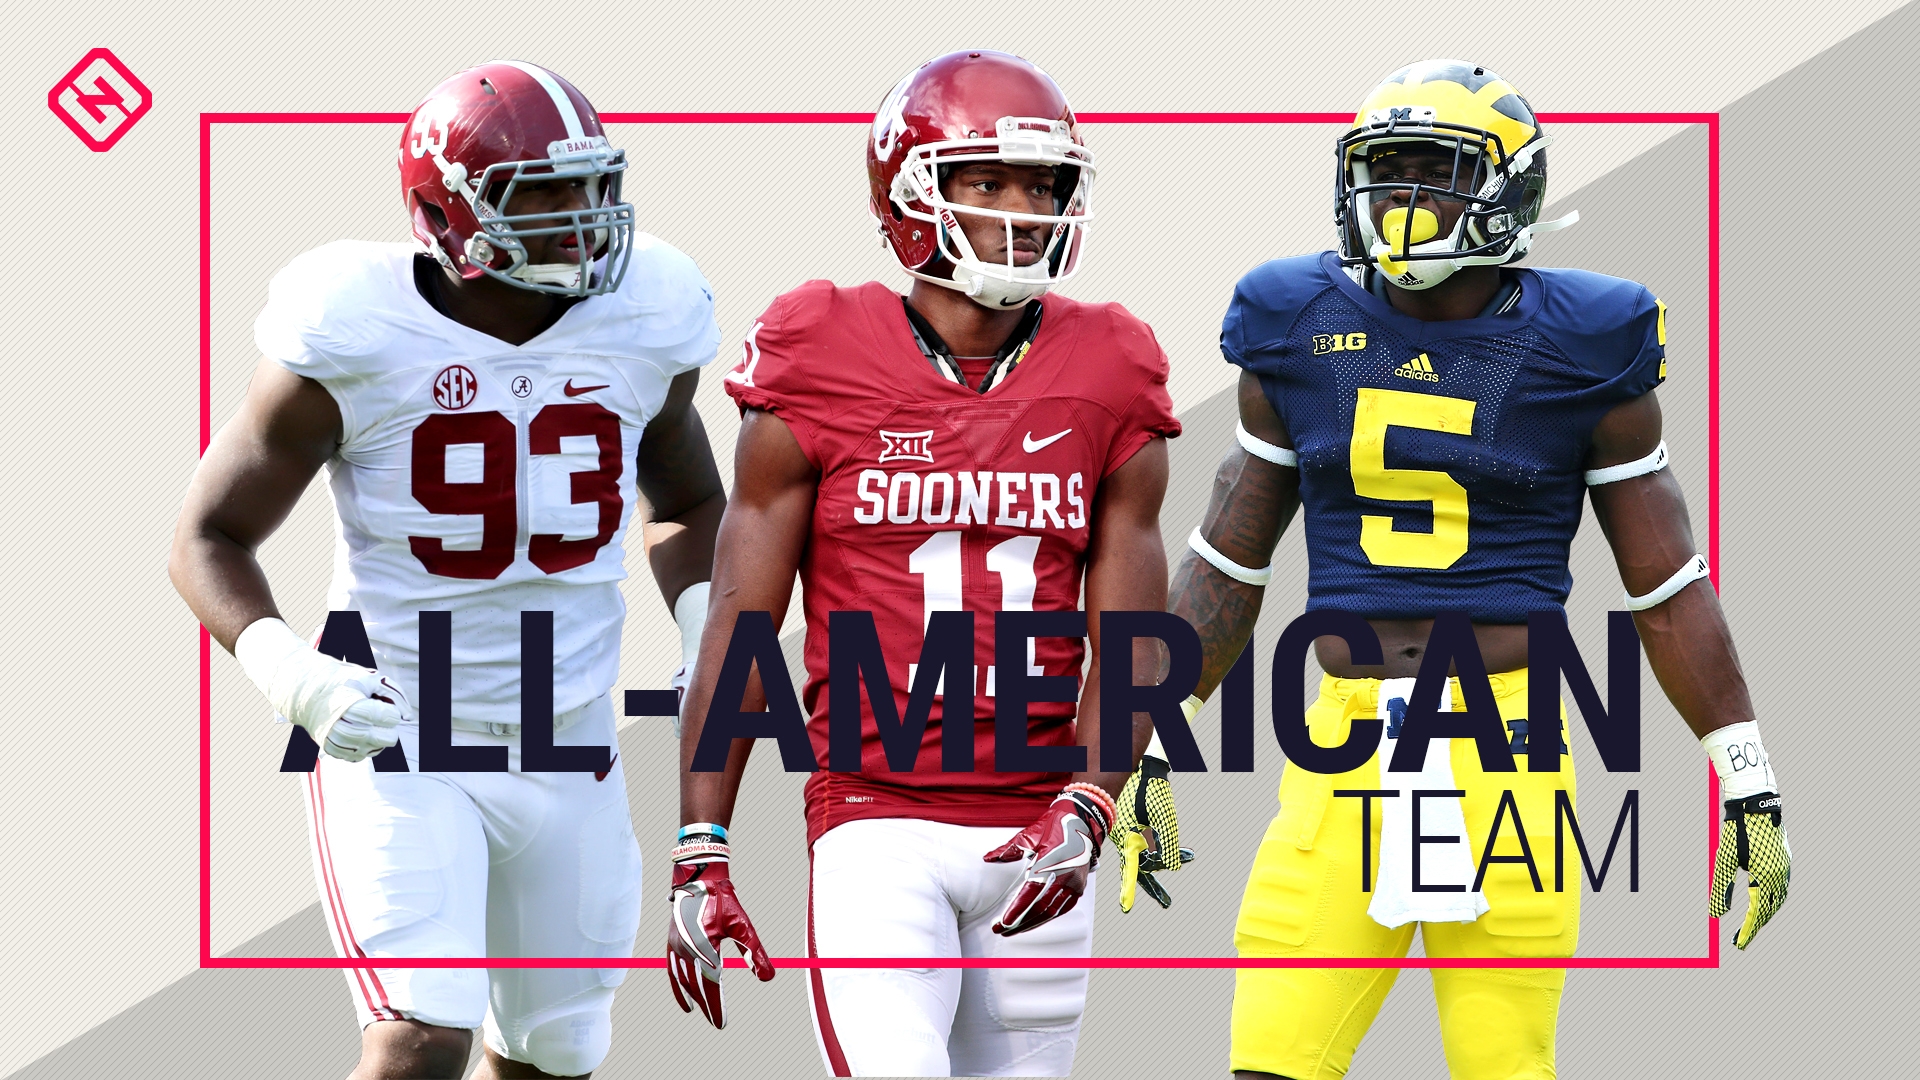 Sporting News 2016 college football All-Americans | Sporting News